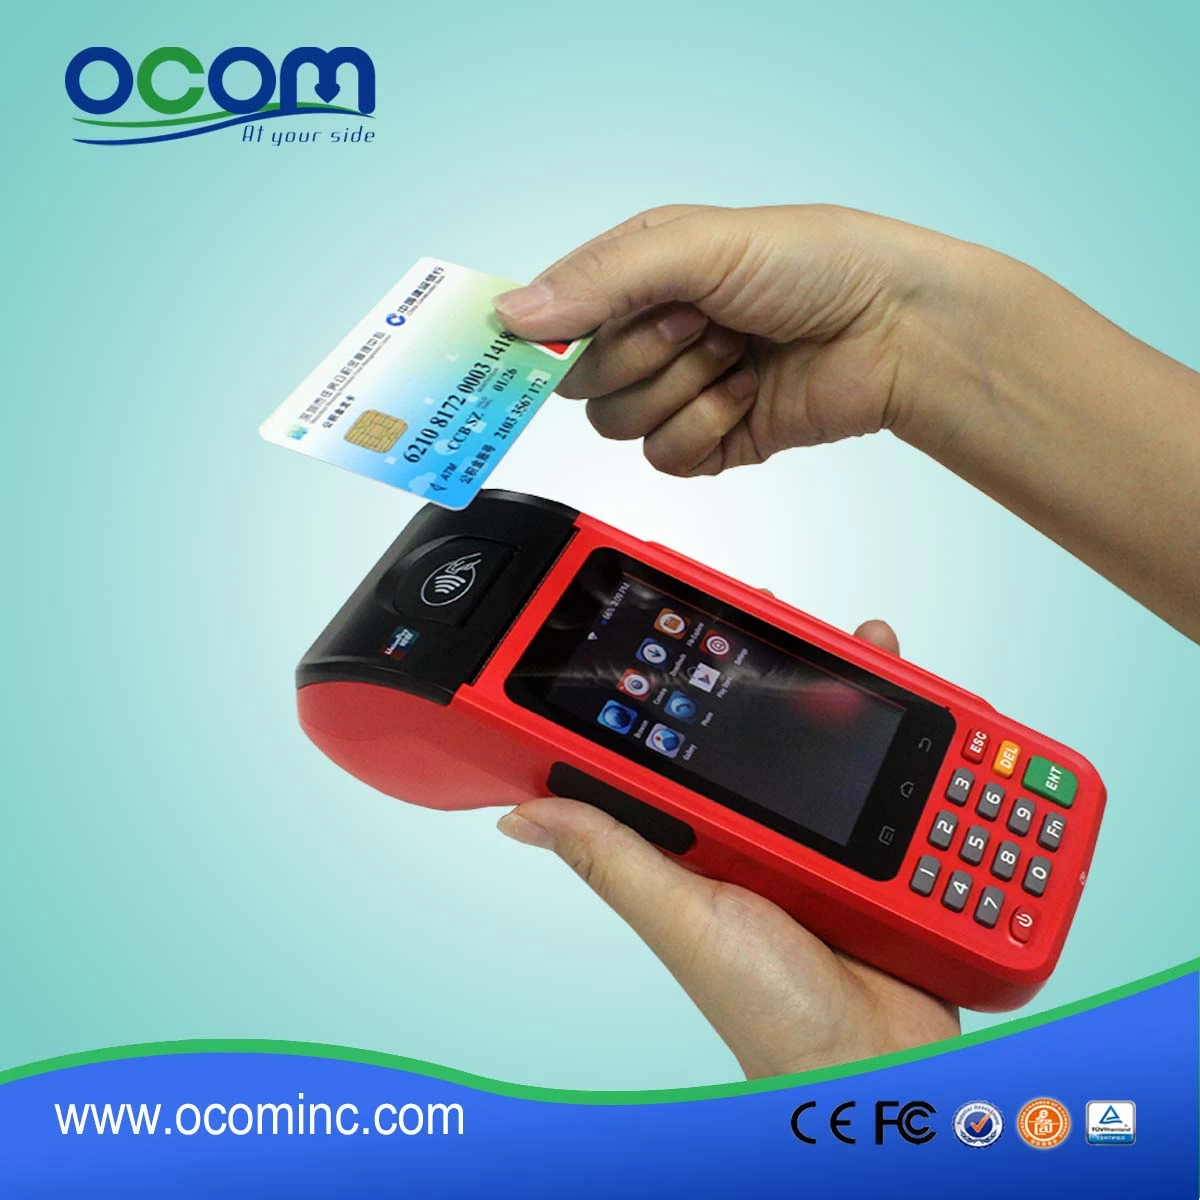 P8000) 2016 Date low cost pos terminal pocket